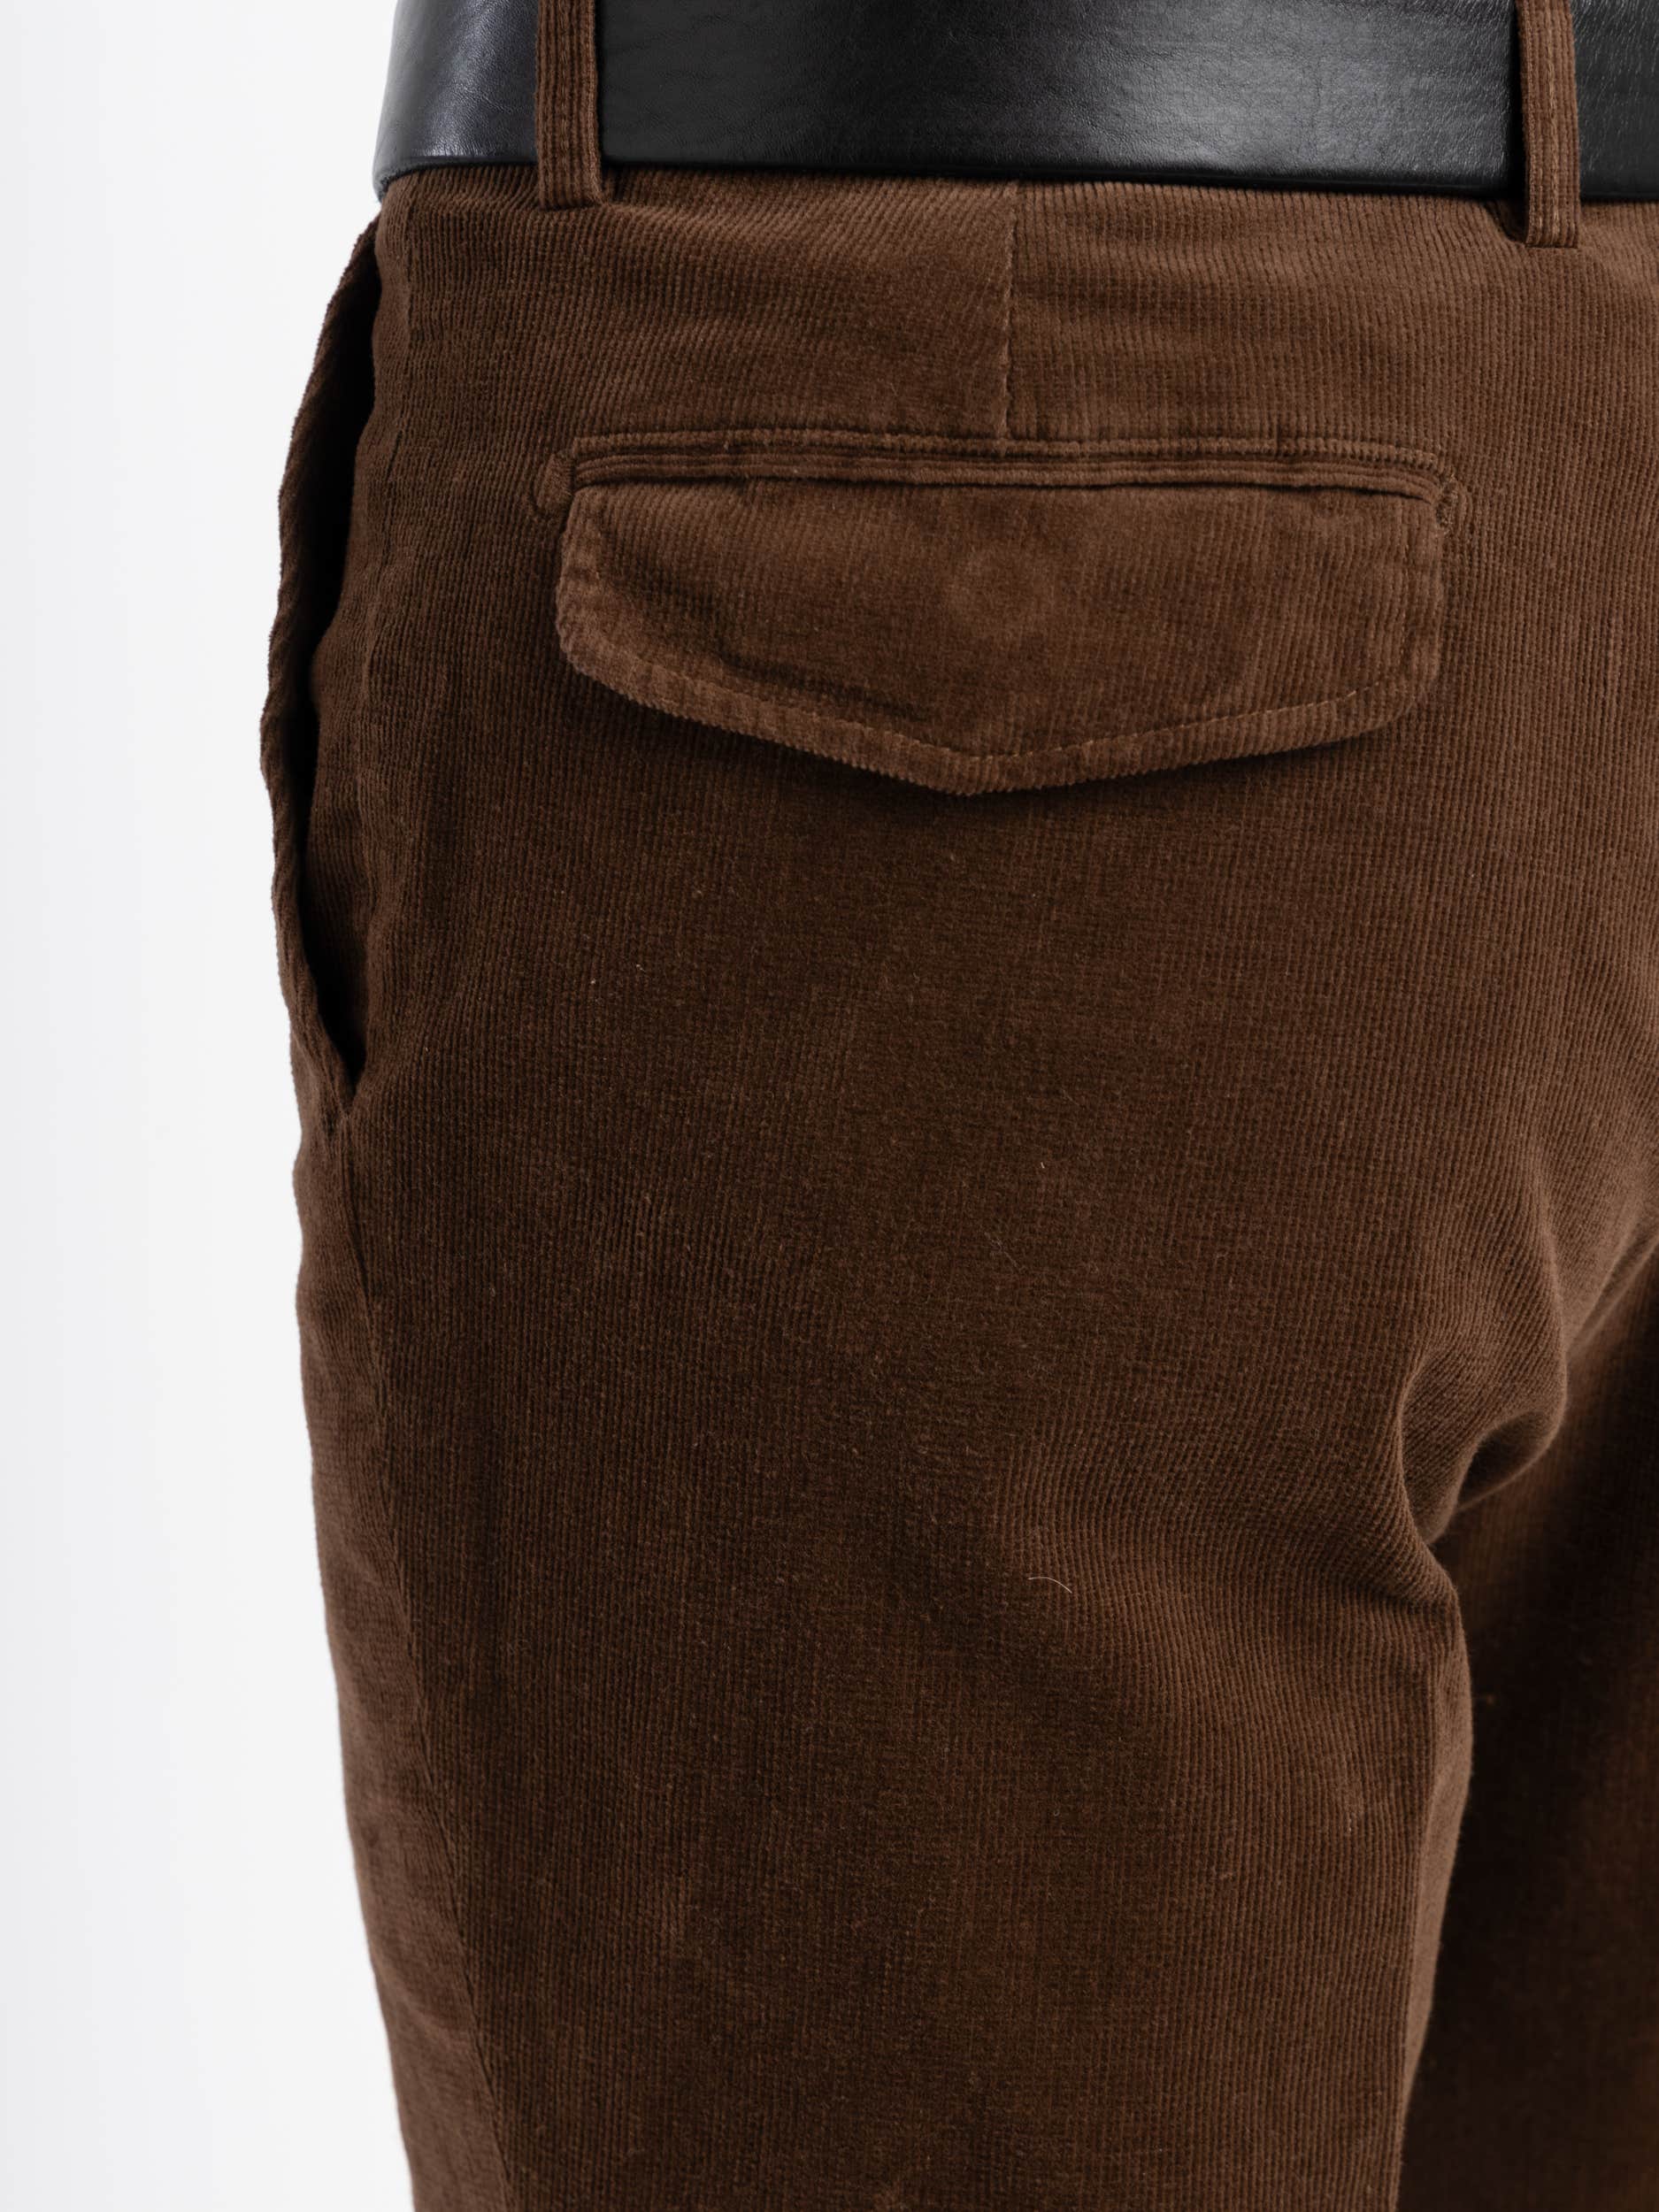 Brown corduroy trousers – He Official Ltd